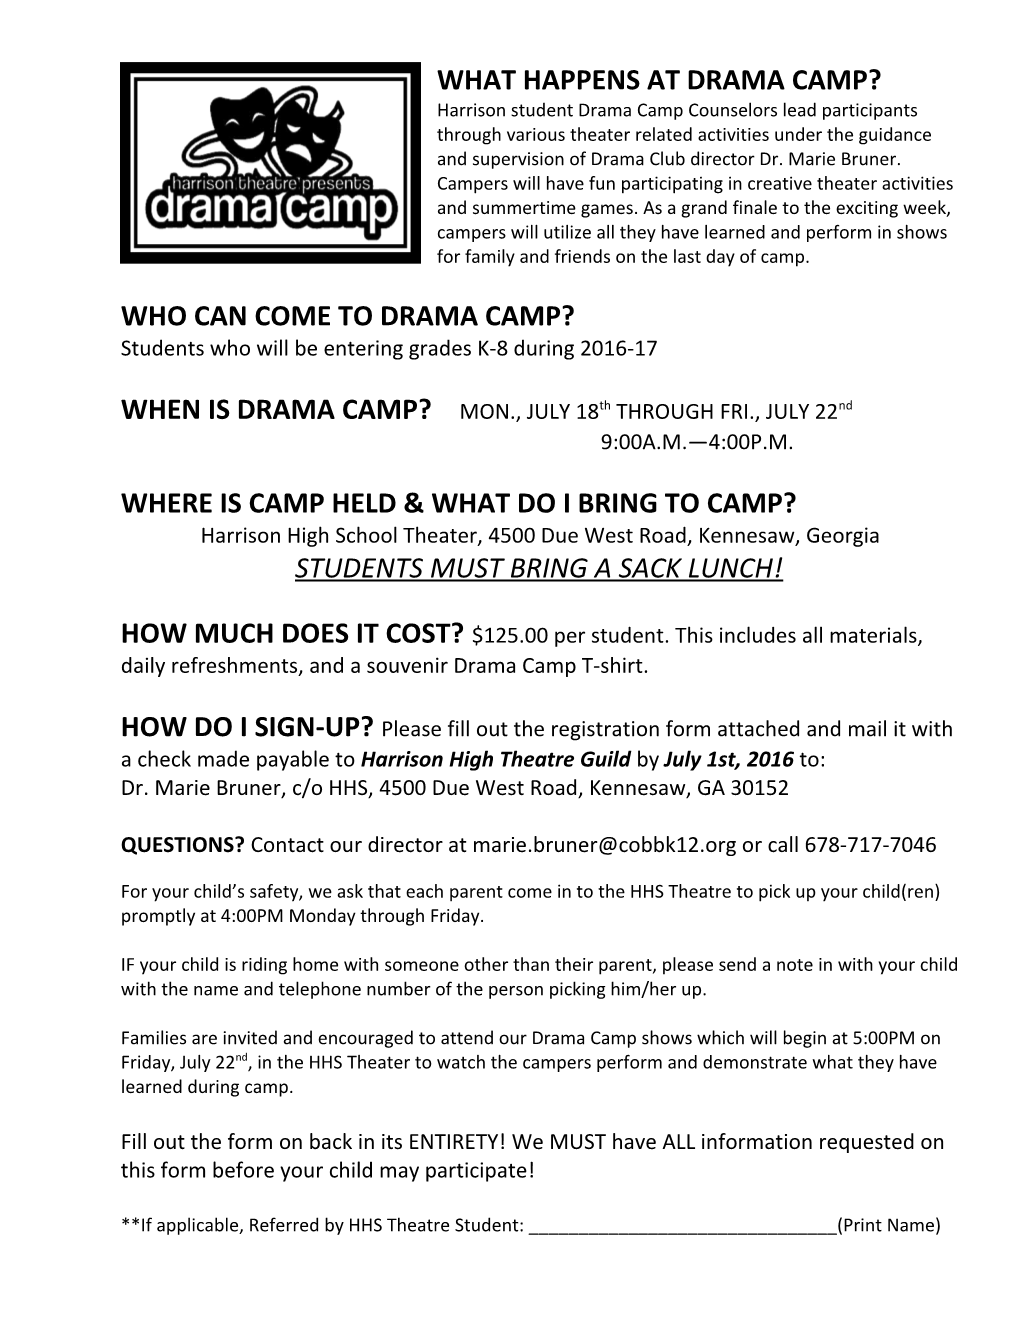 Who Can Come to Drama Camp?